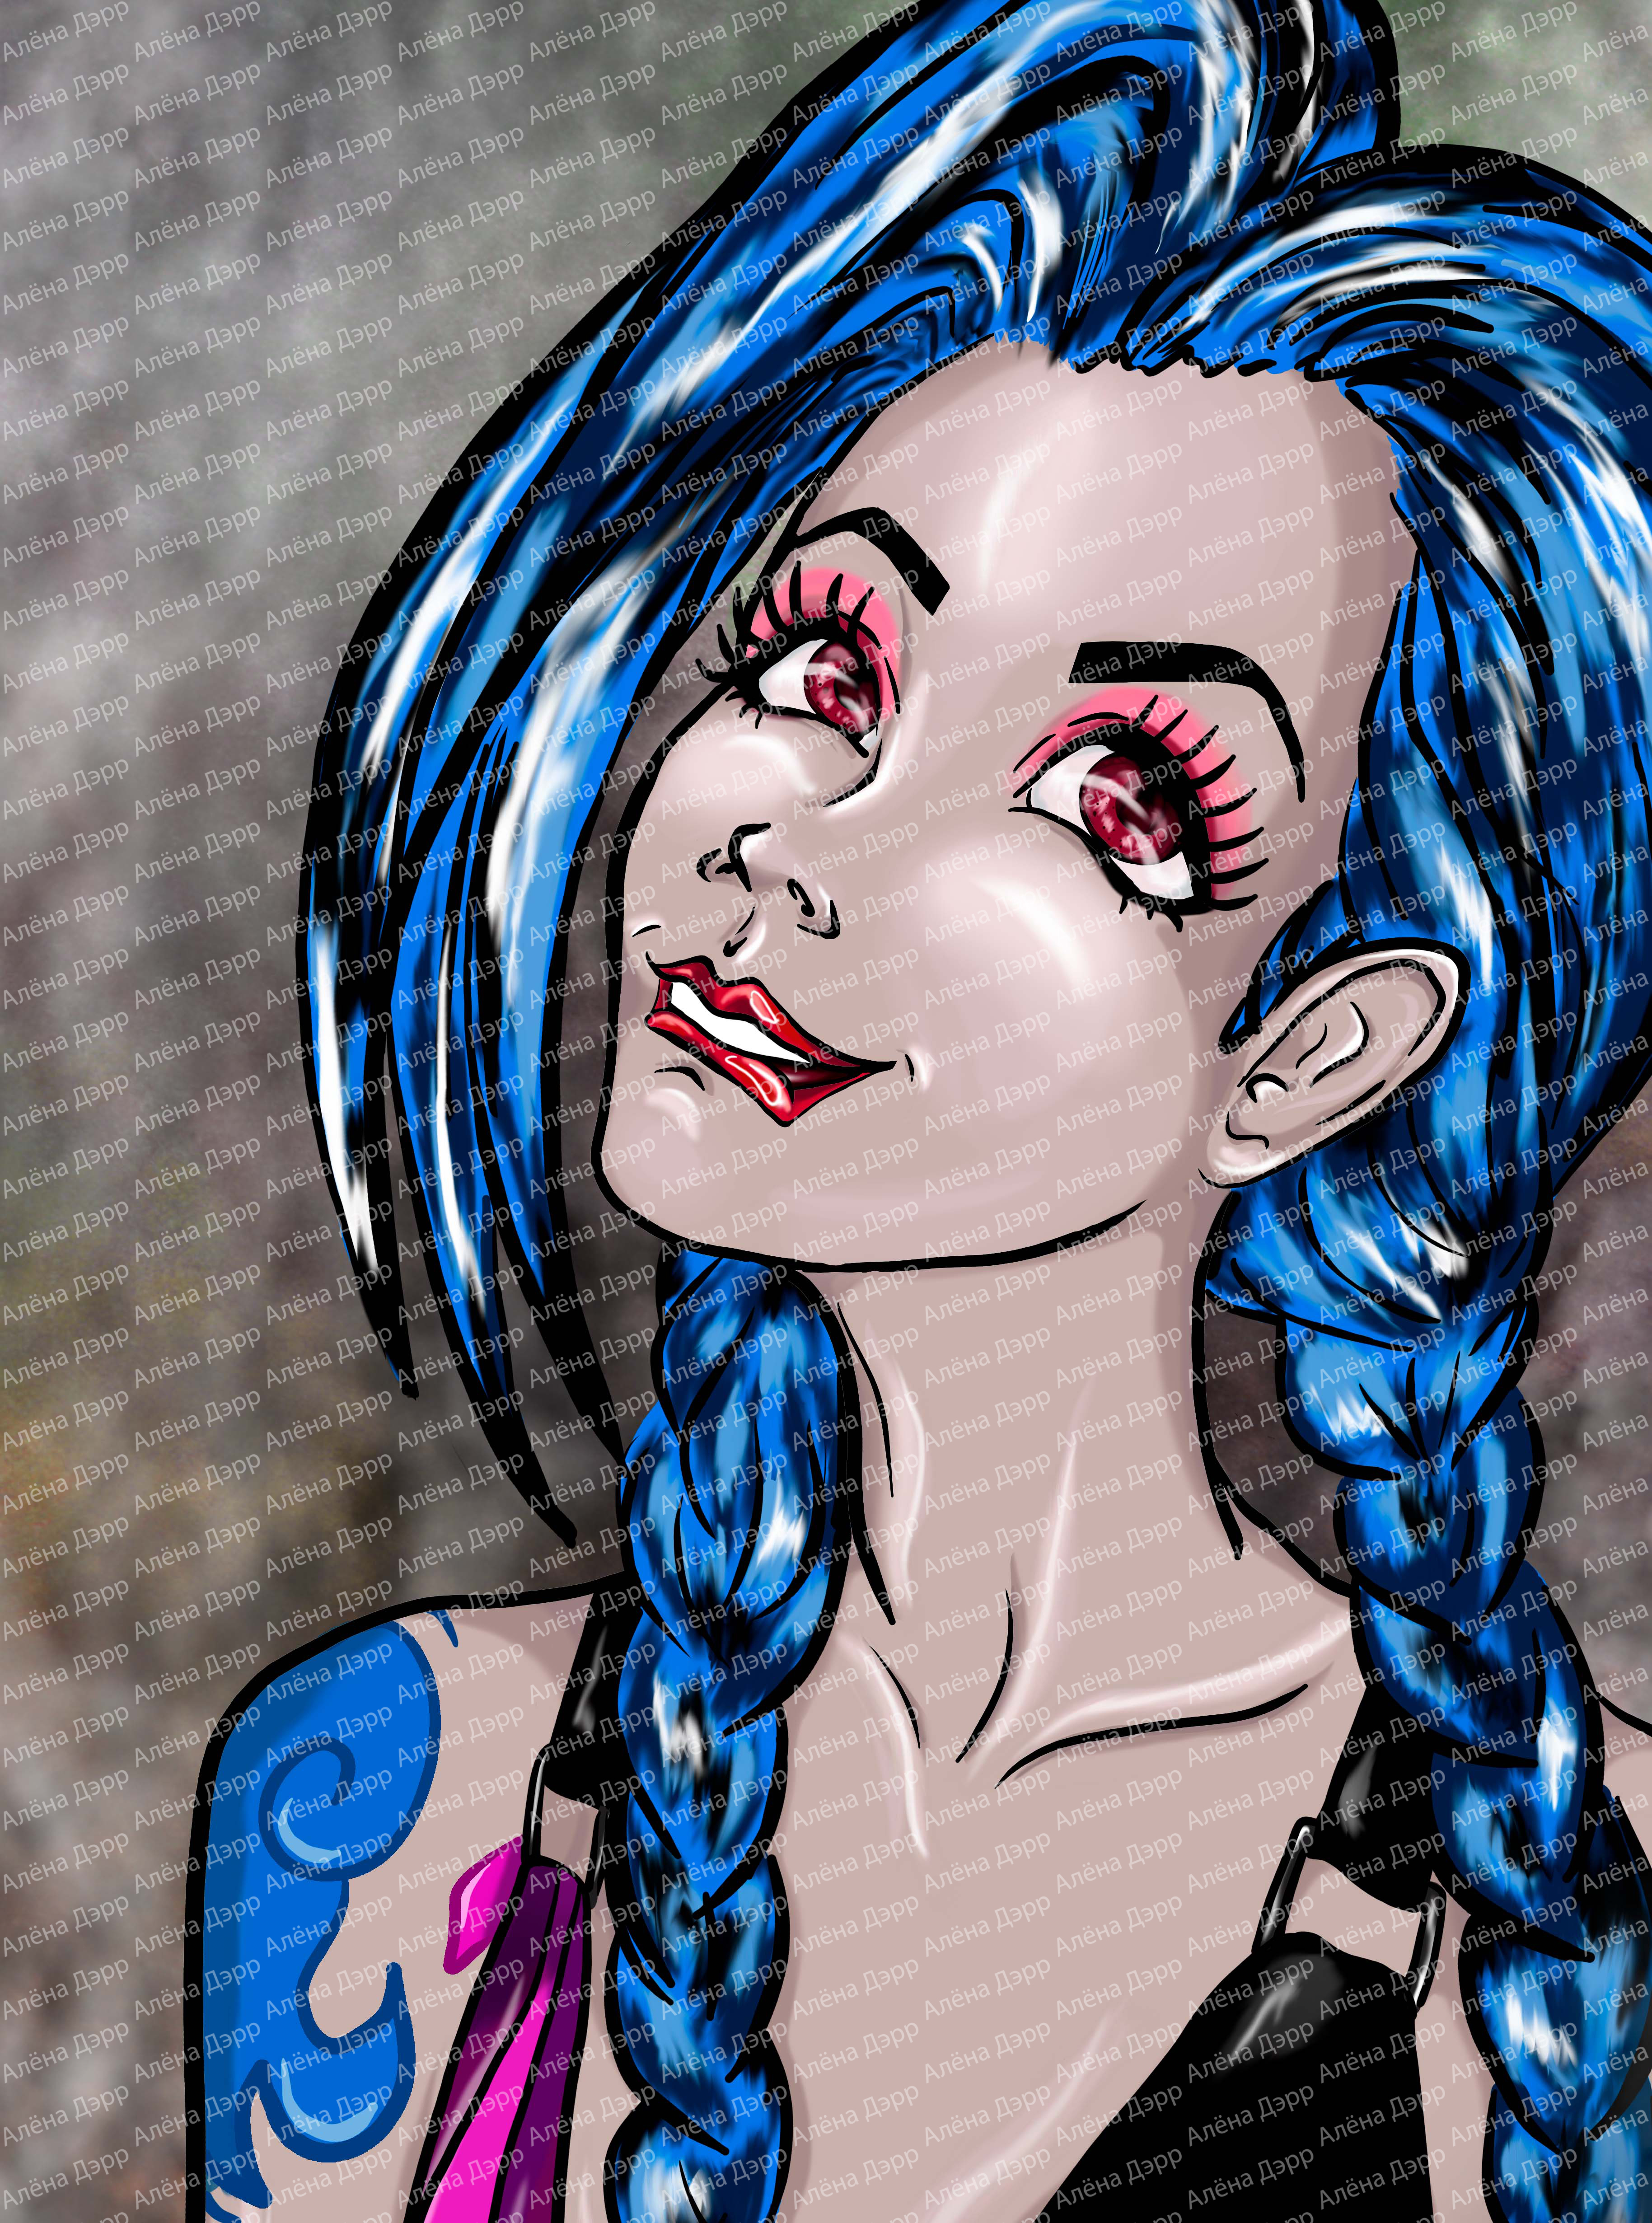 Jinx %d0%b4%d0%bb%d1%8f %d0%bf%d0%be%d1%80%d1%82%d1%84%d0%be%d0%bb%d0%b8%d0%be